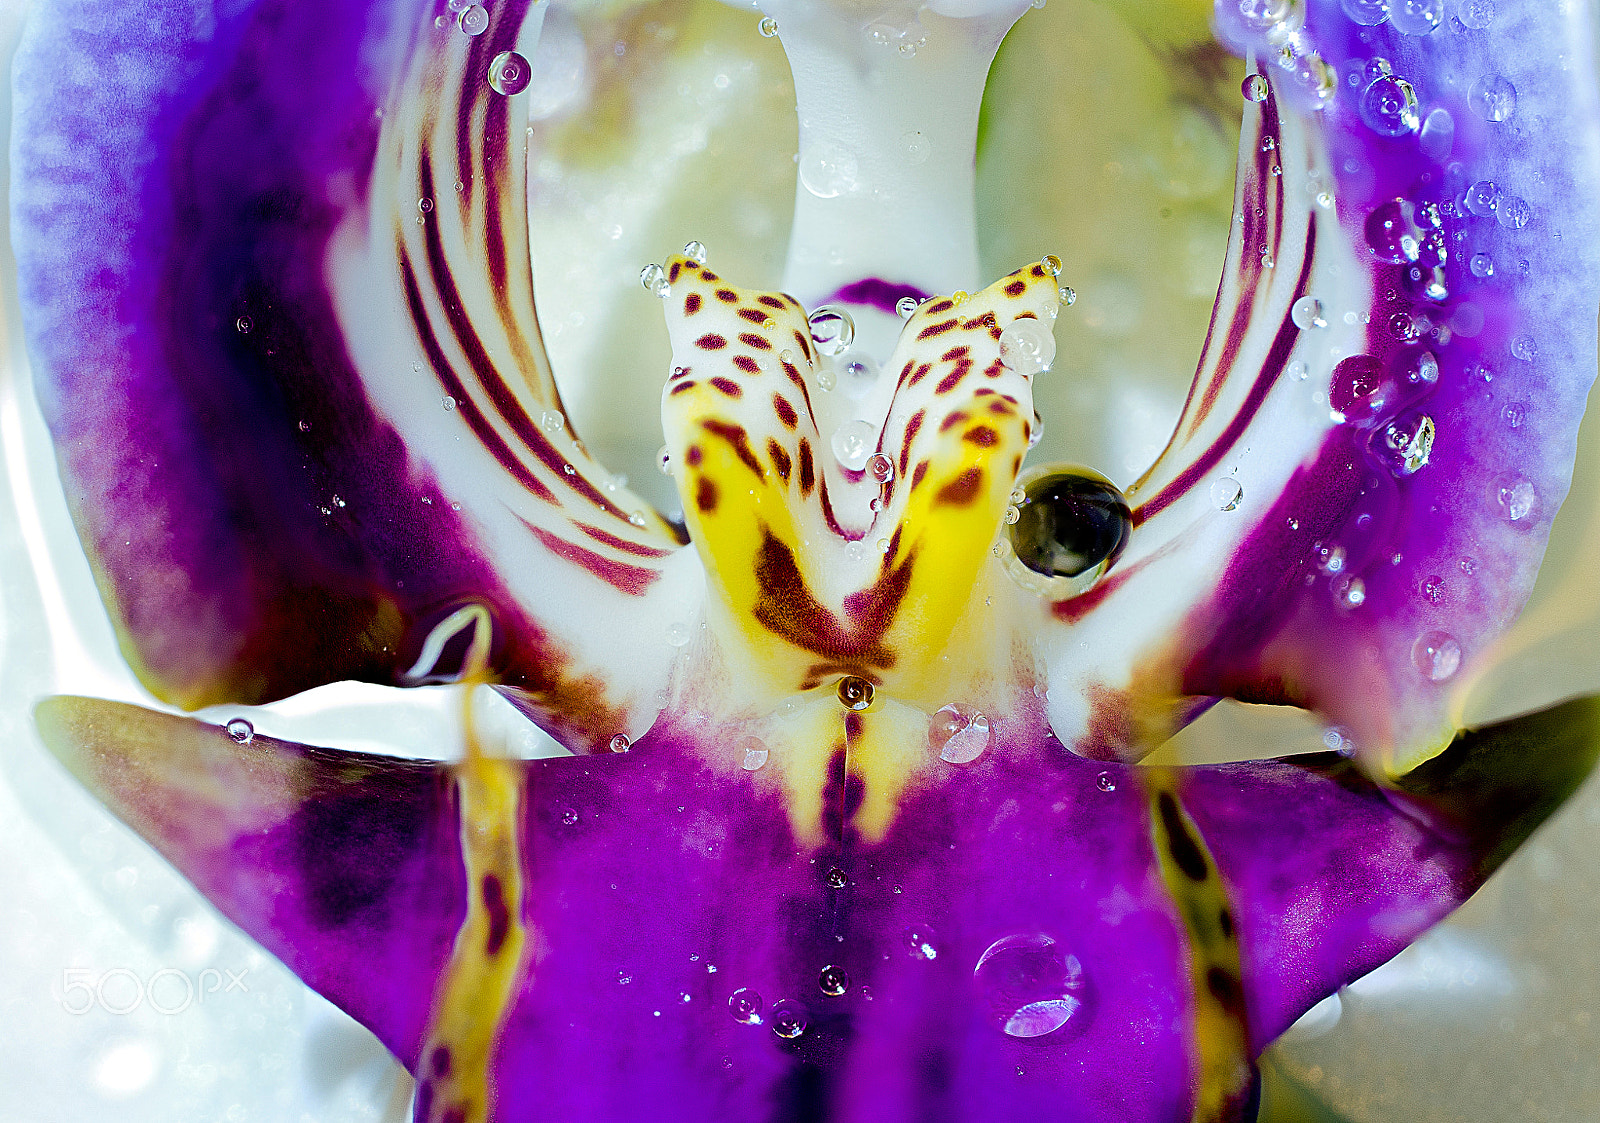 Sony a7 sample photo. Orchid dream photography